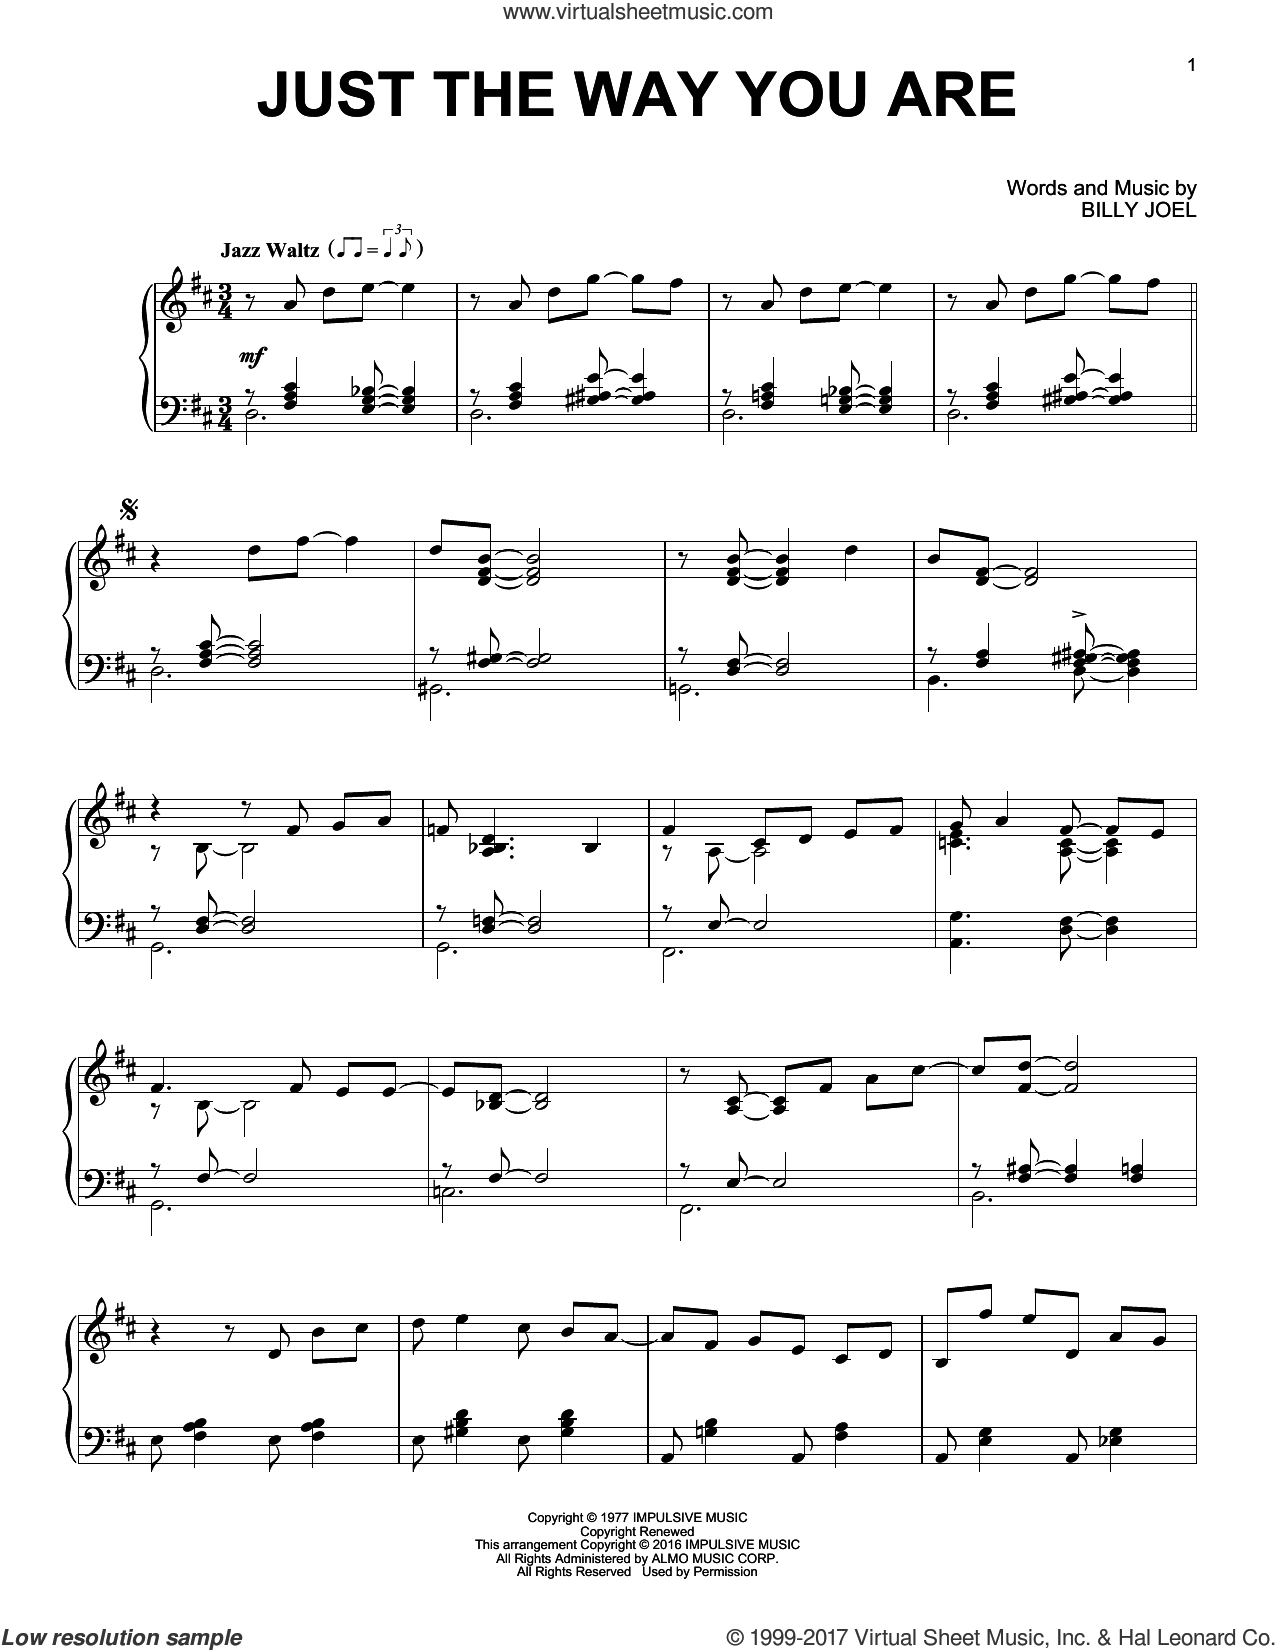 Joel - Just The Way You Are [Jazz version] sheet music for piano solo v2